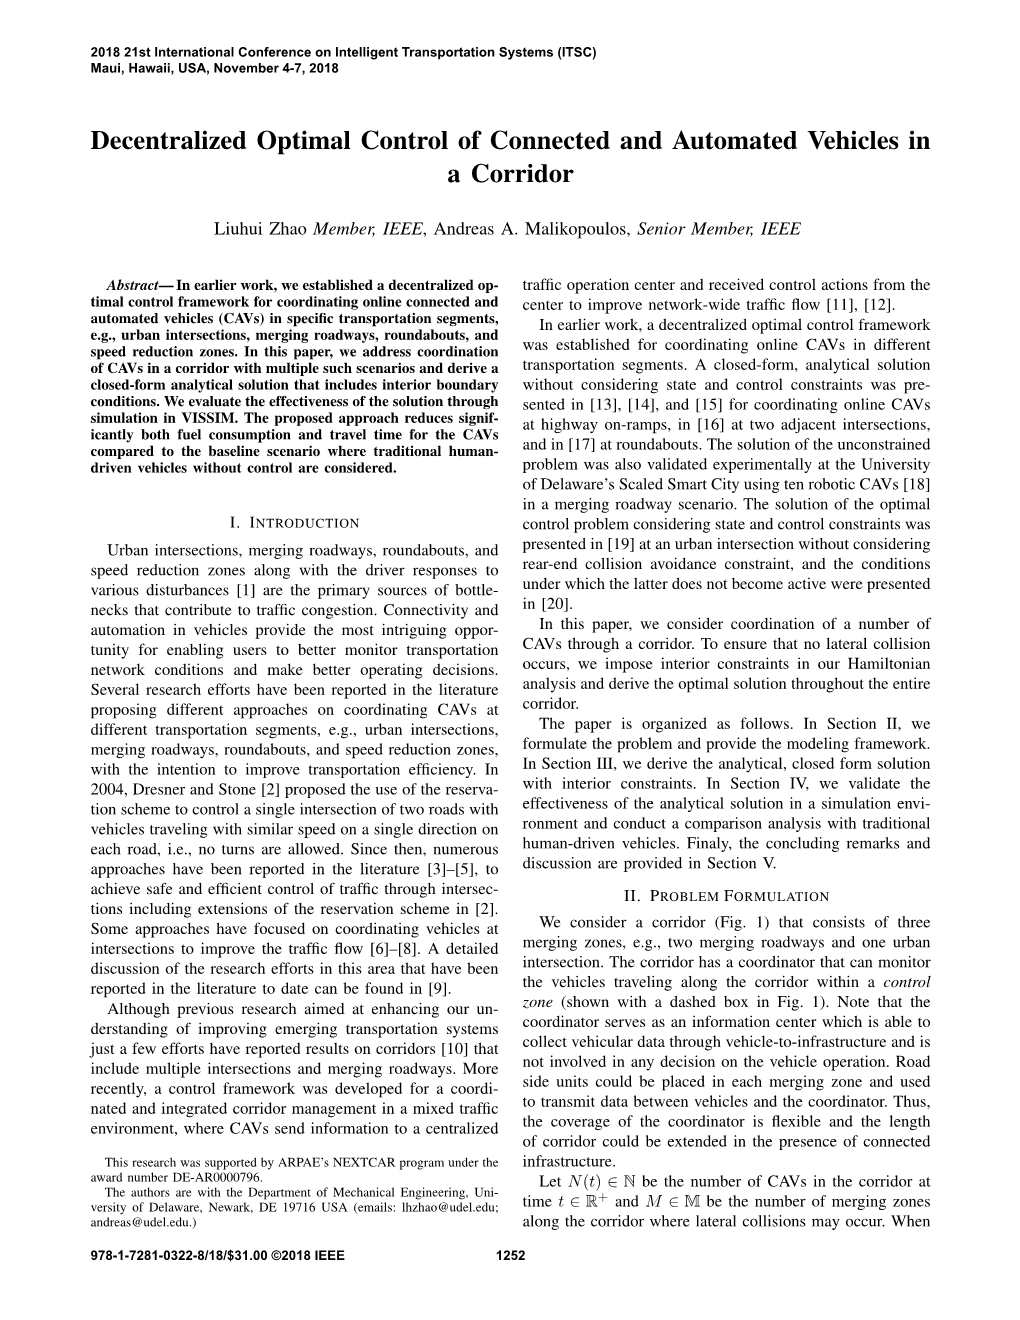 Decentralized Optimal Control of Connected and Automated Vehicles in a Corridor